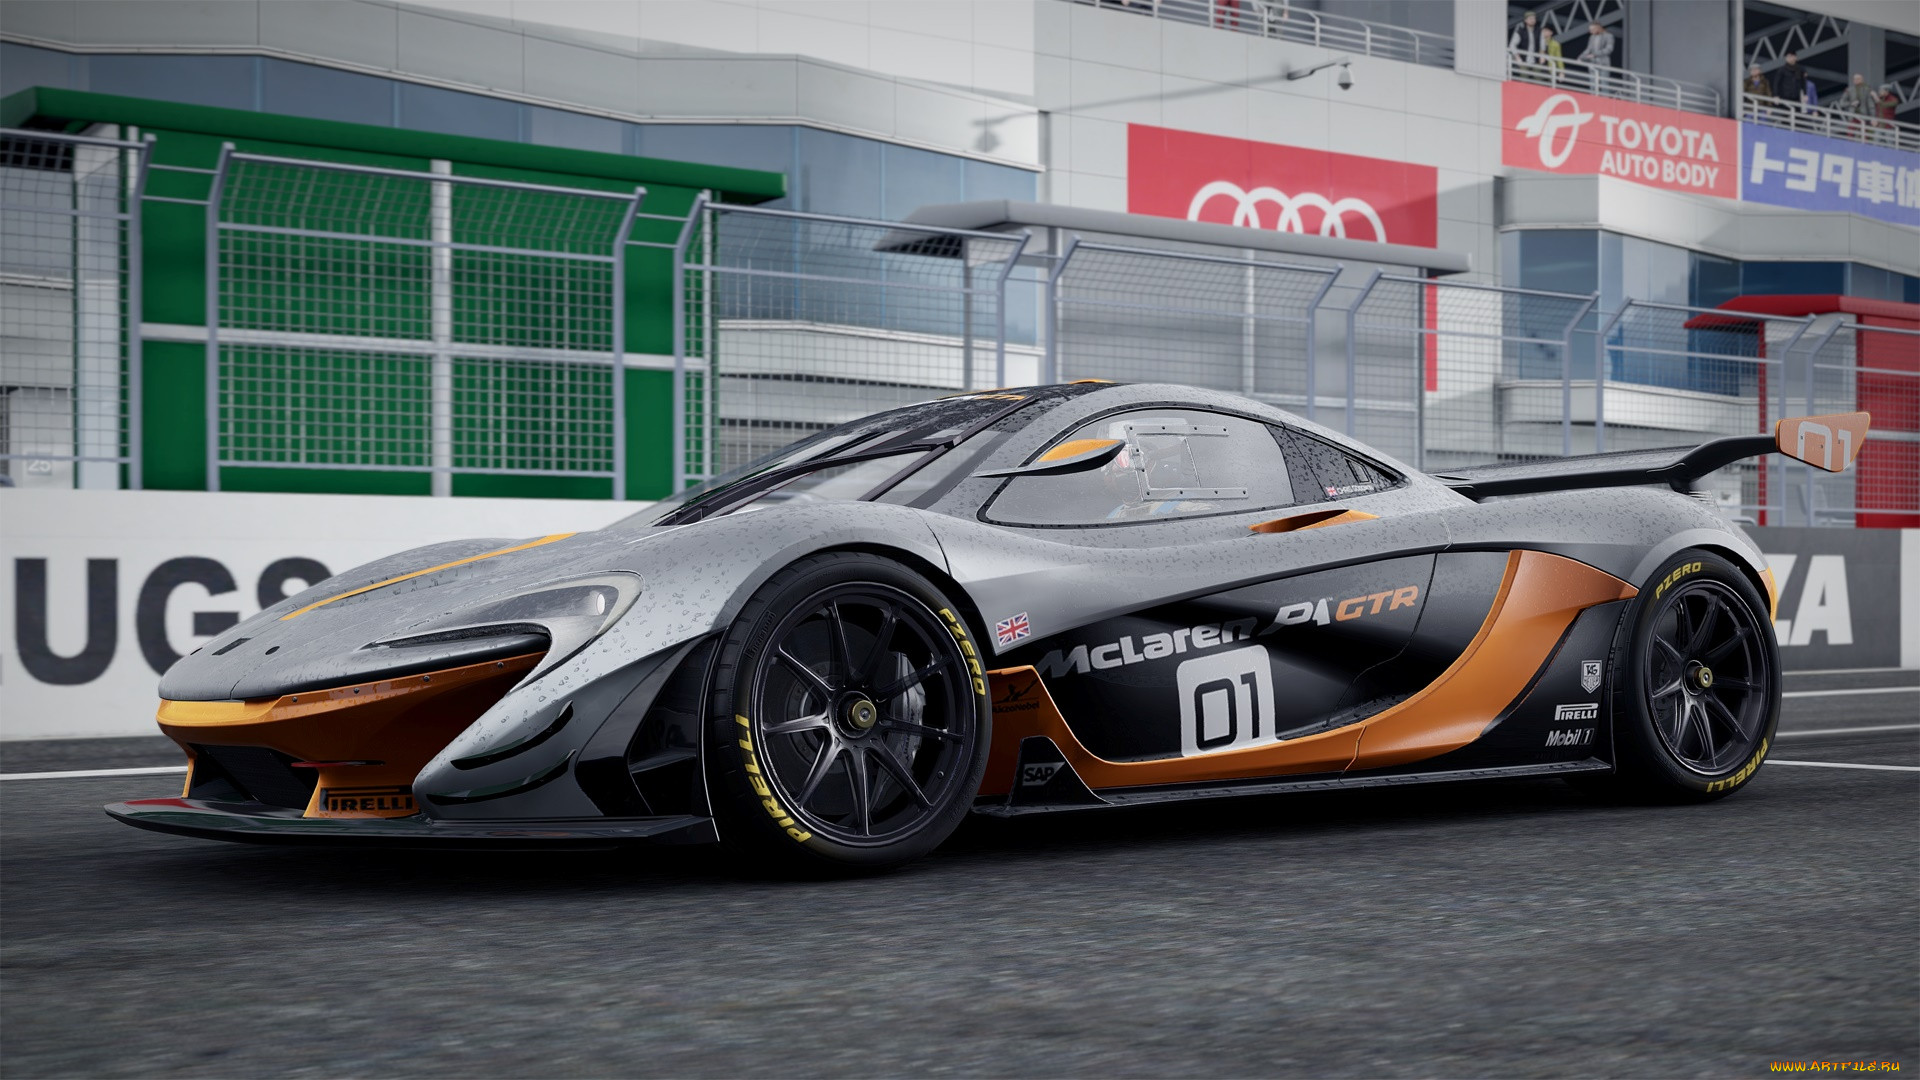  , project cars 2, project, cars, 2